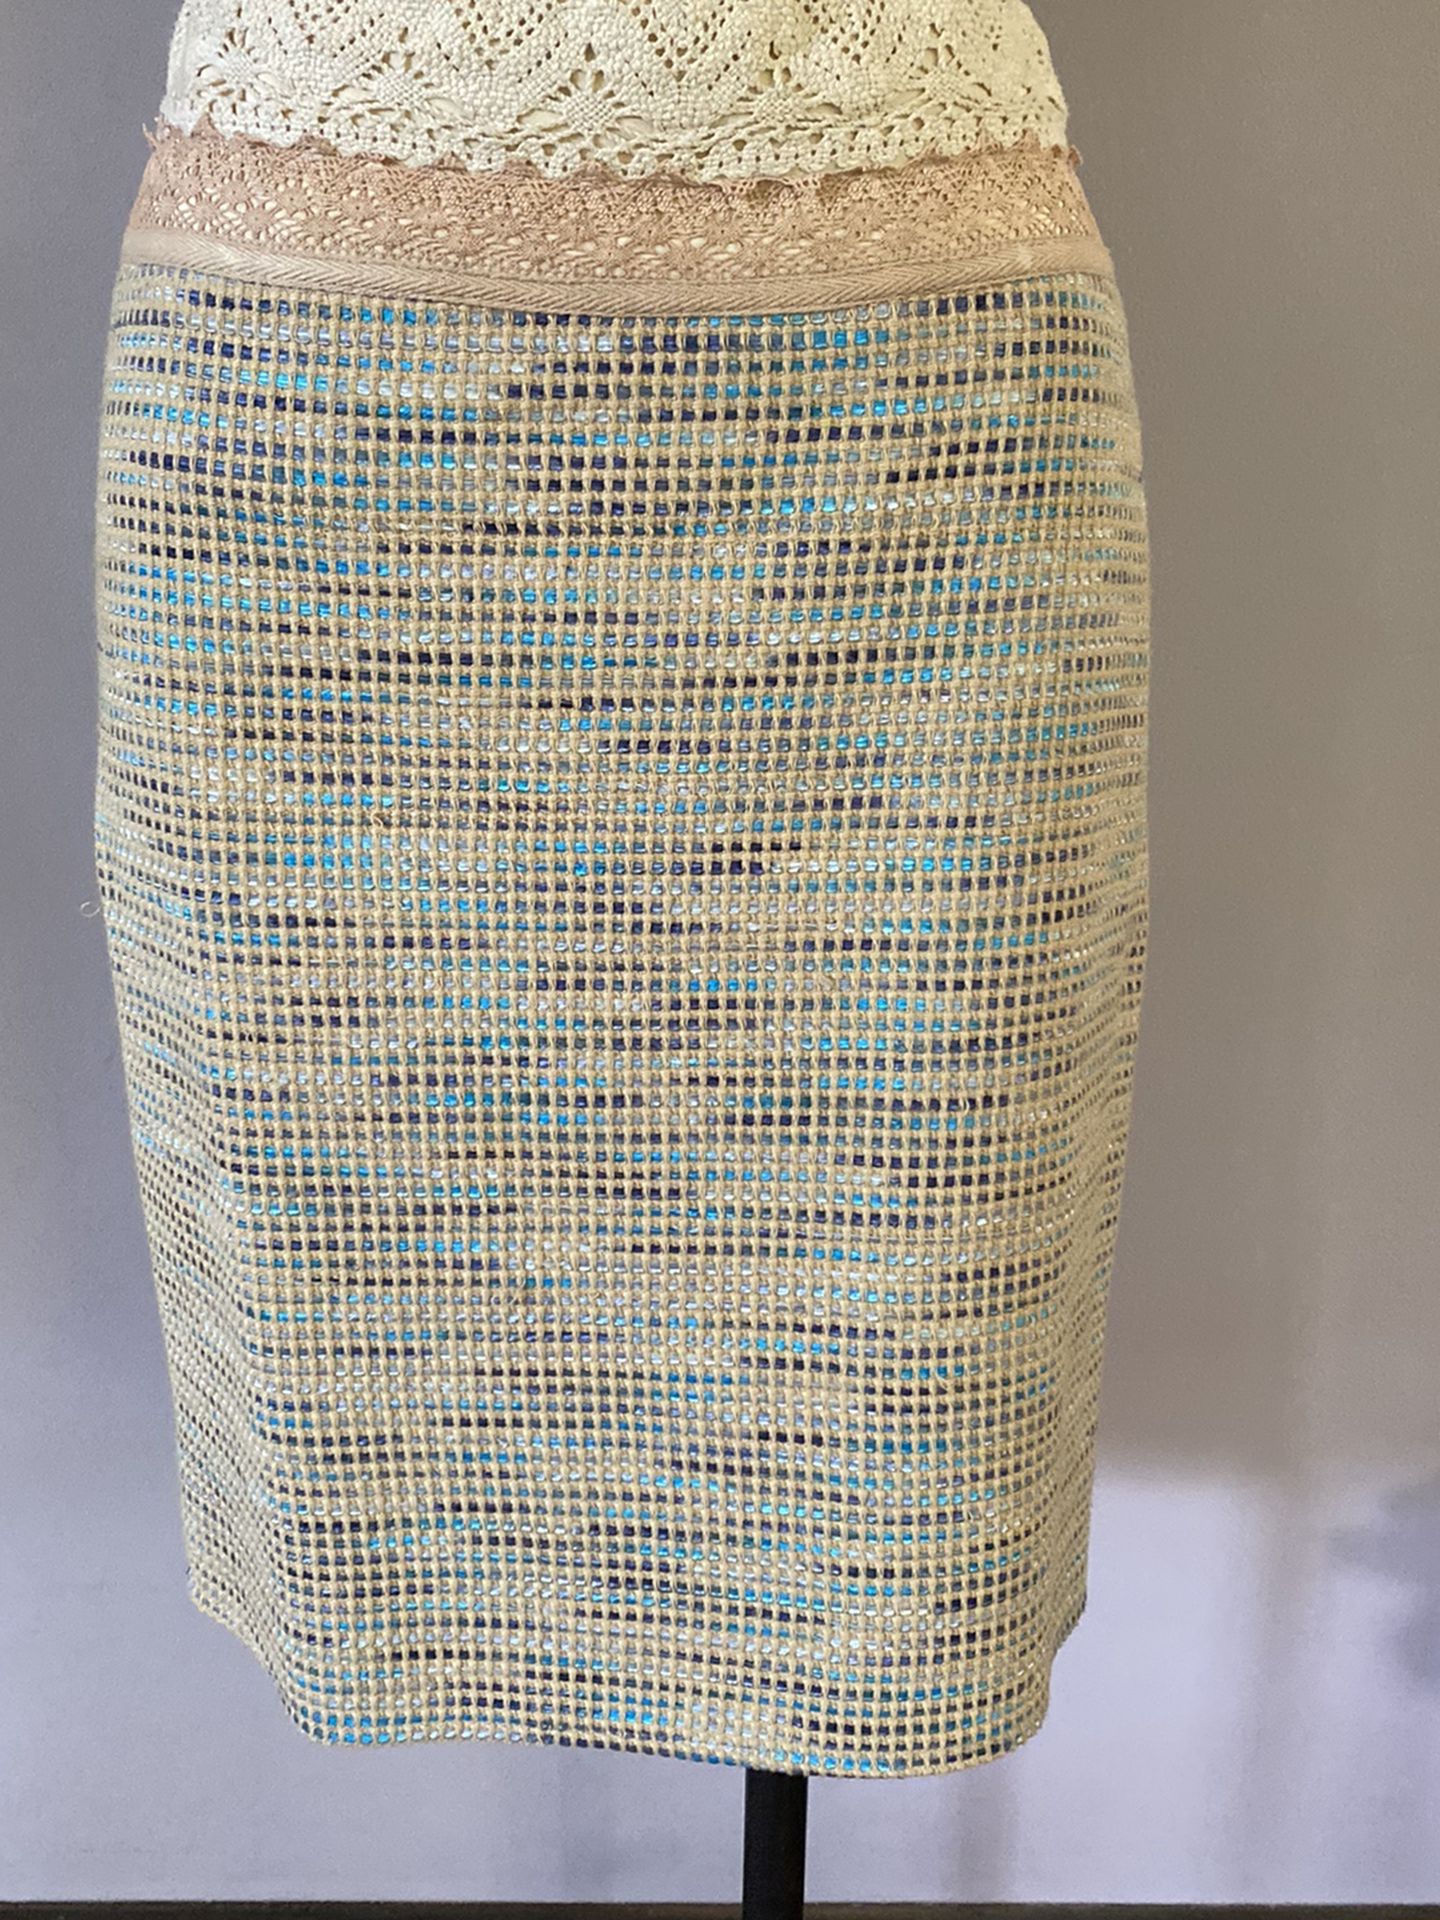 Vintage Nanette Lepore pencil skirt size 2. Beautiful skirt in excellent condition. 